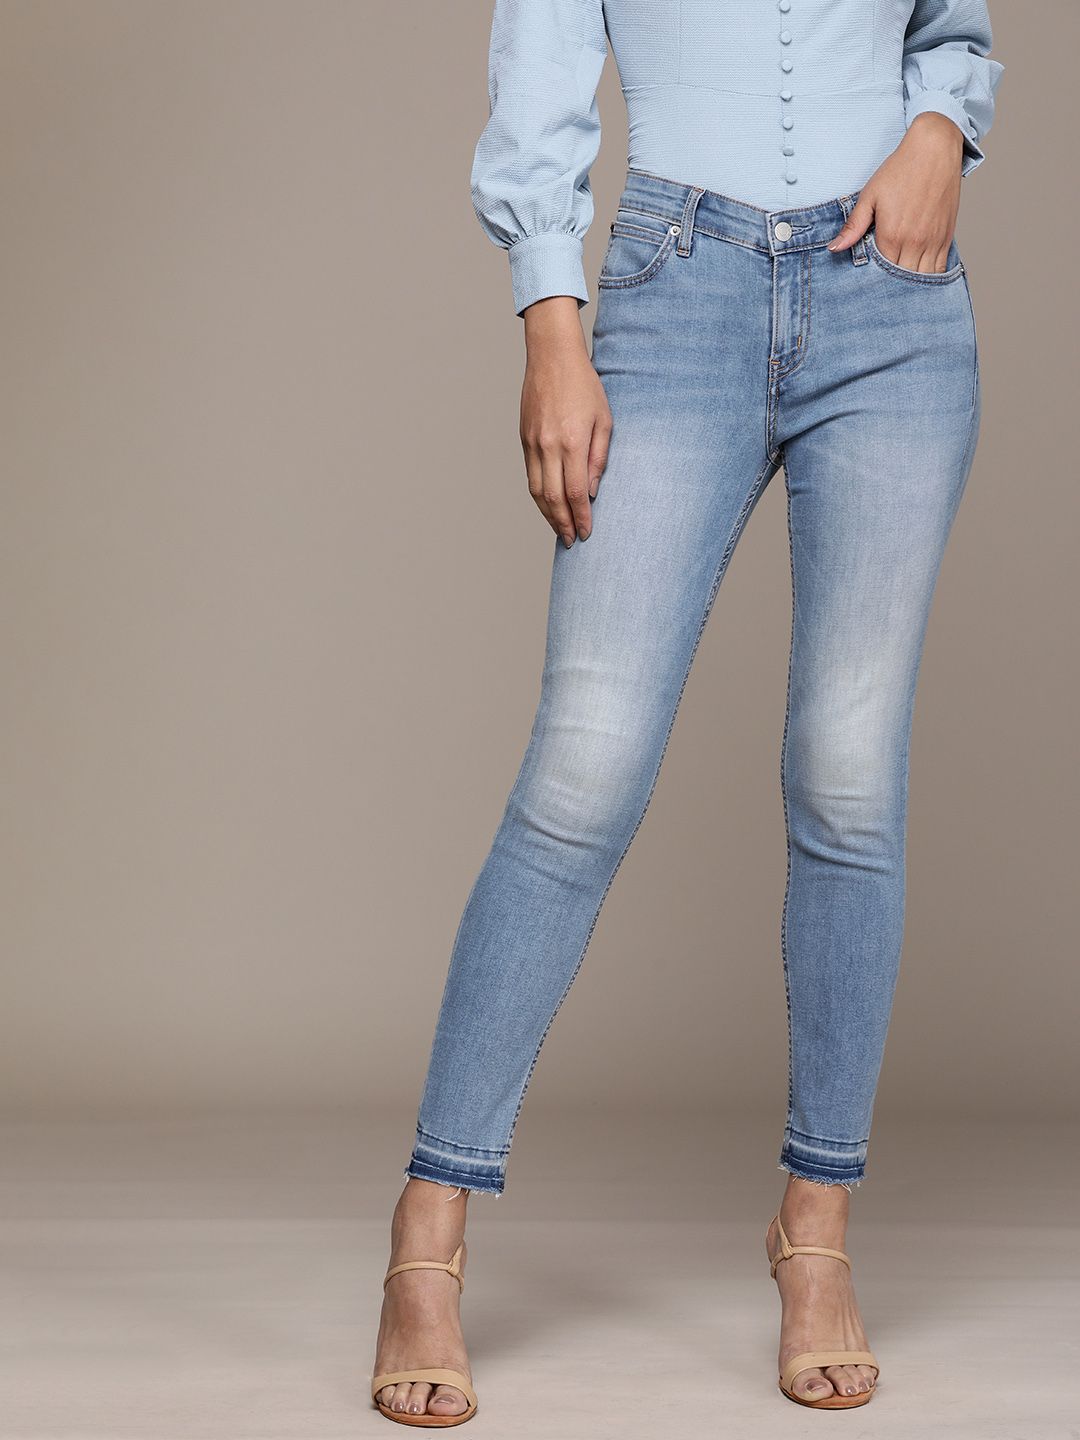 Calvin Klein Jeans Women Blue Body Slim Fit Heavy Fade Stretchable Casual Jeans Price in India